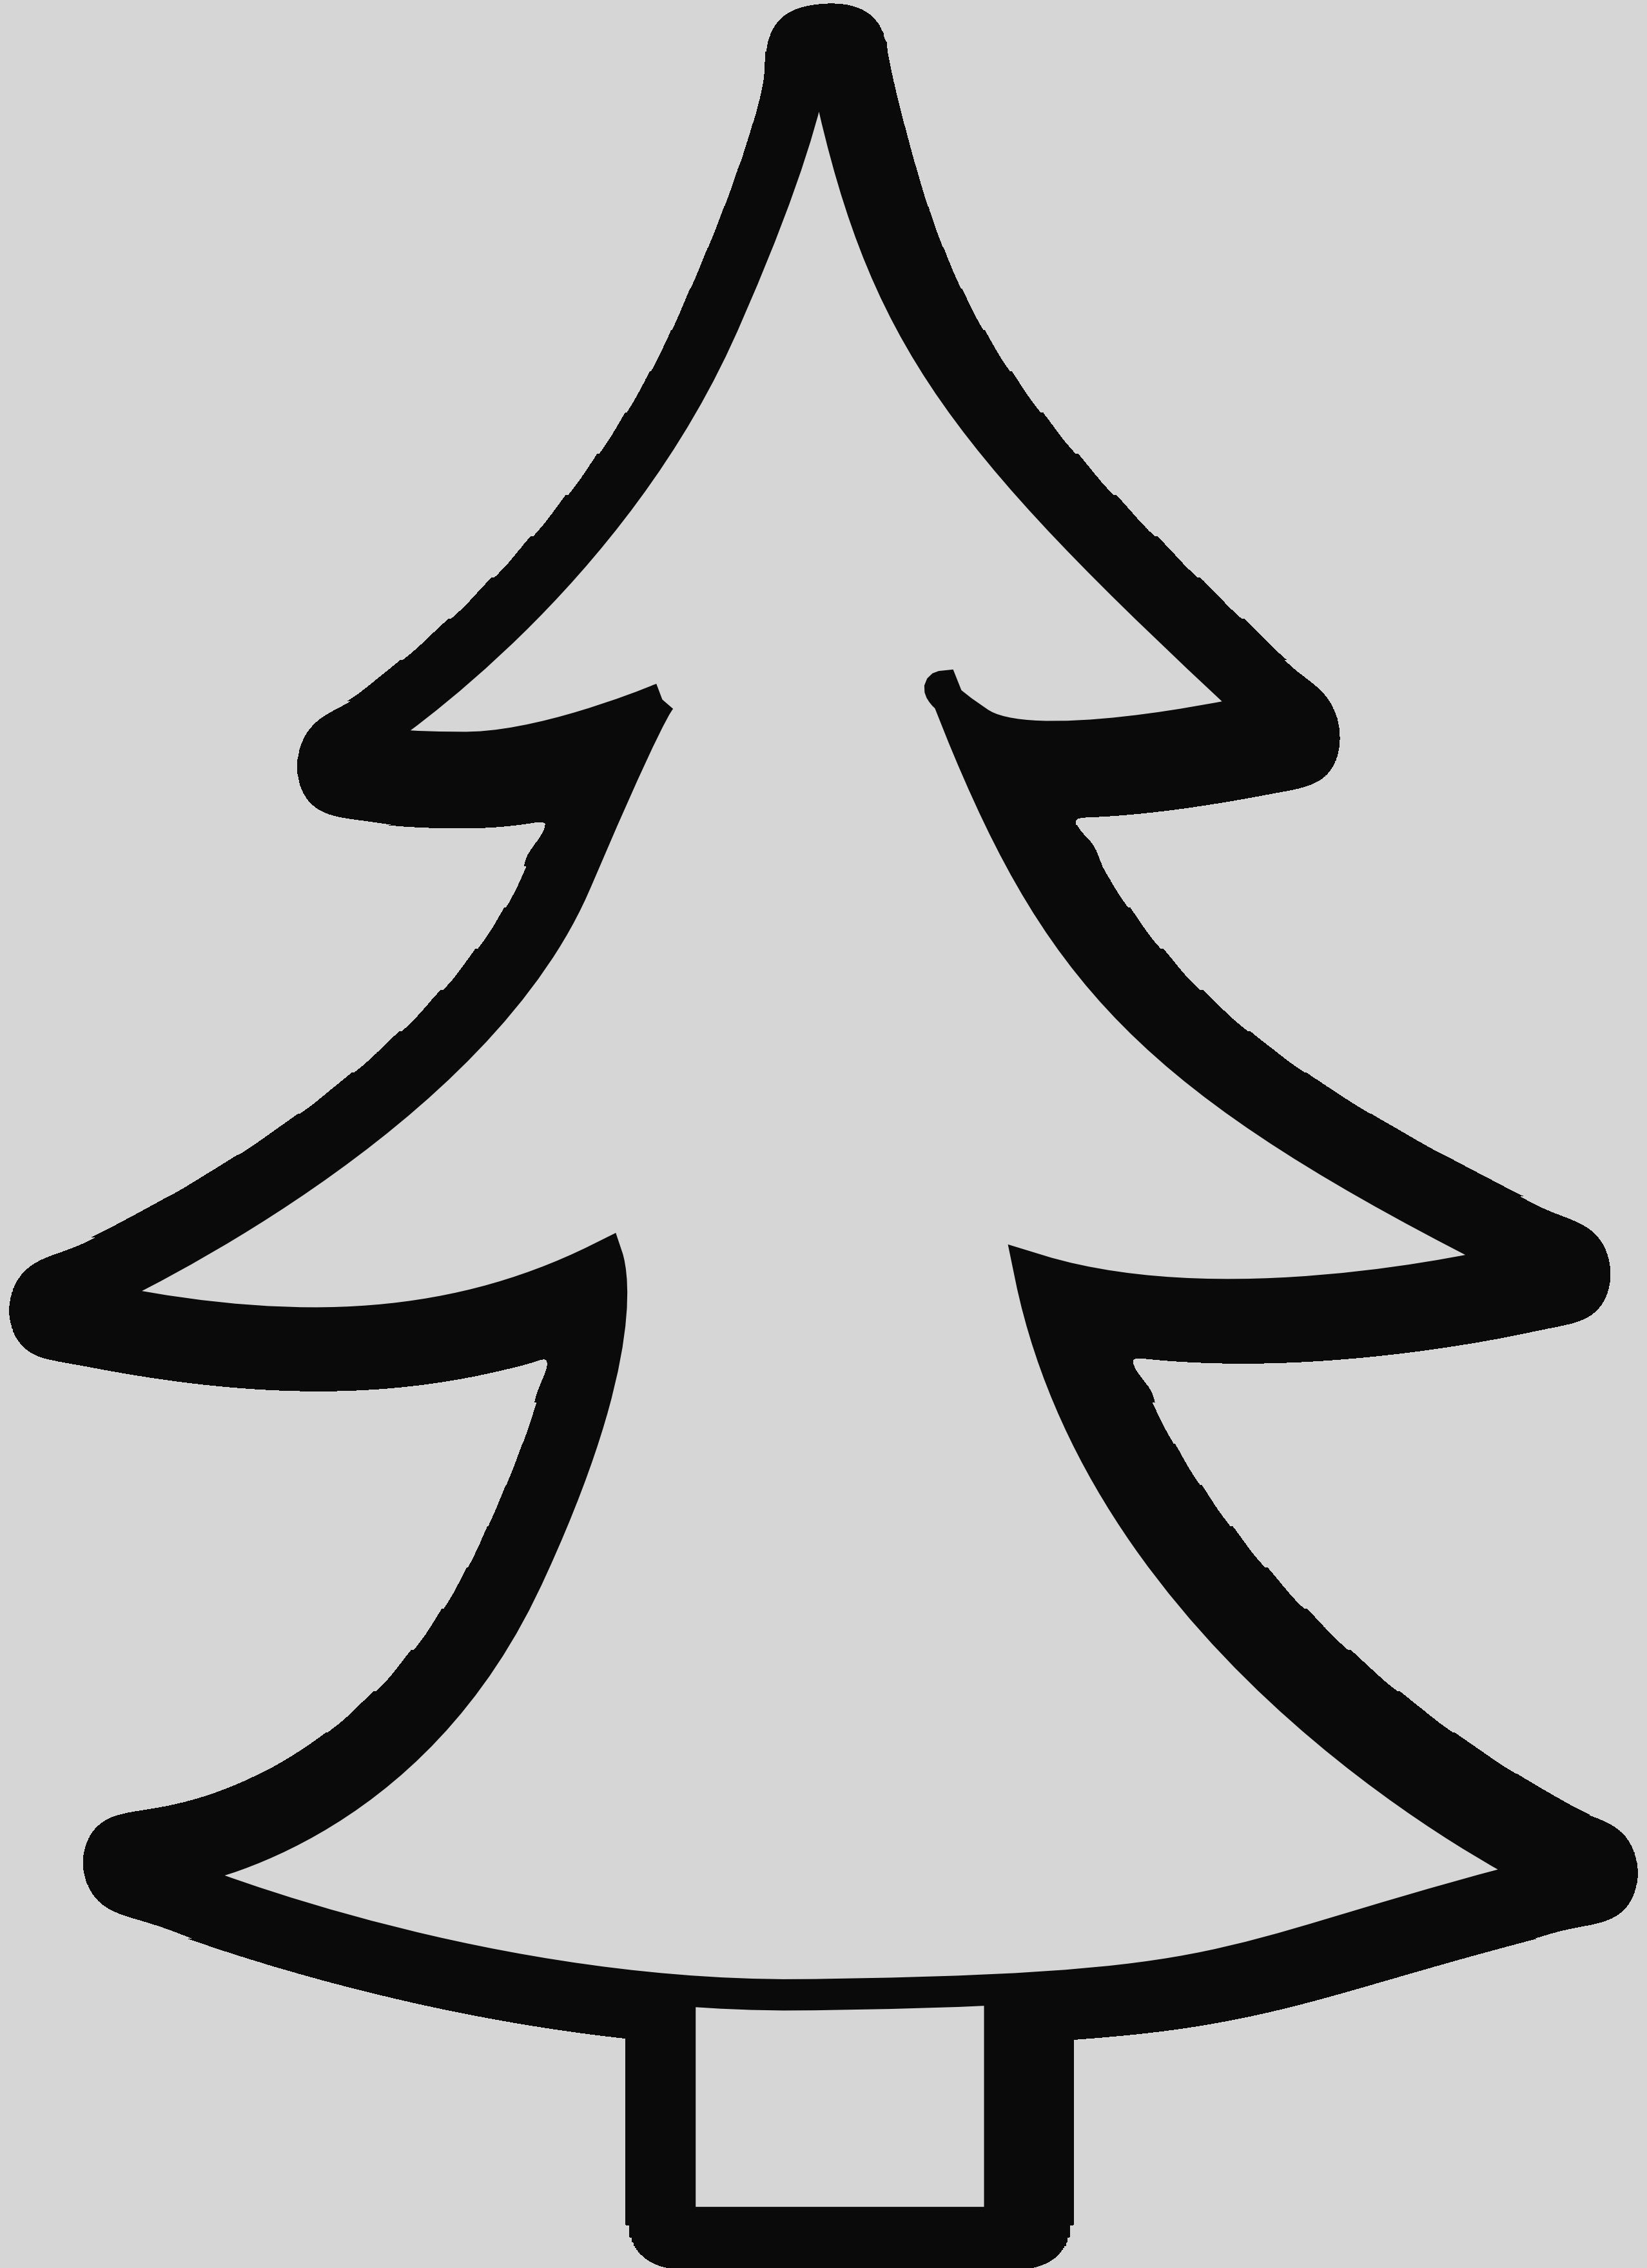 Download Christmas Tree Clipart Black And White Christmas Trees - Black And  White Free Clipart Christmas Tree PNG Image with No Background 